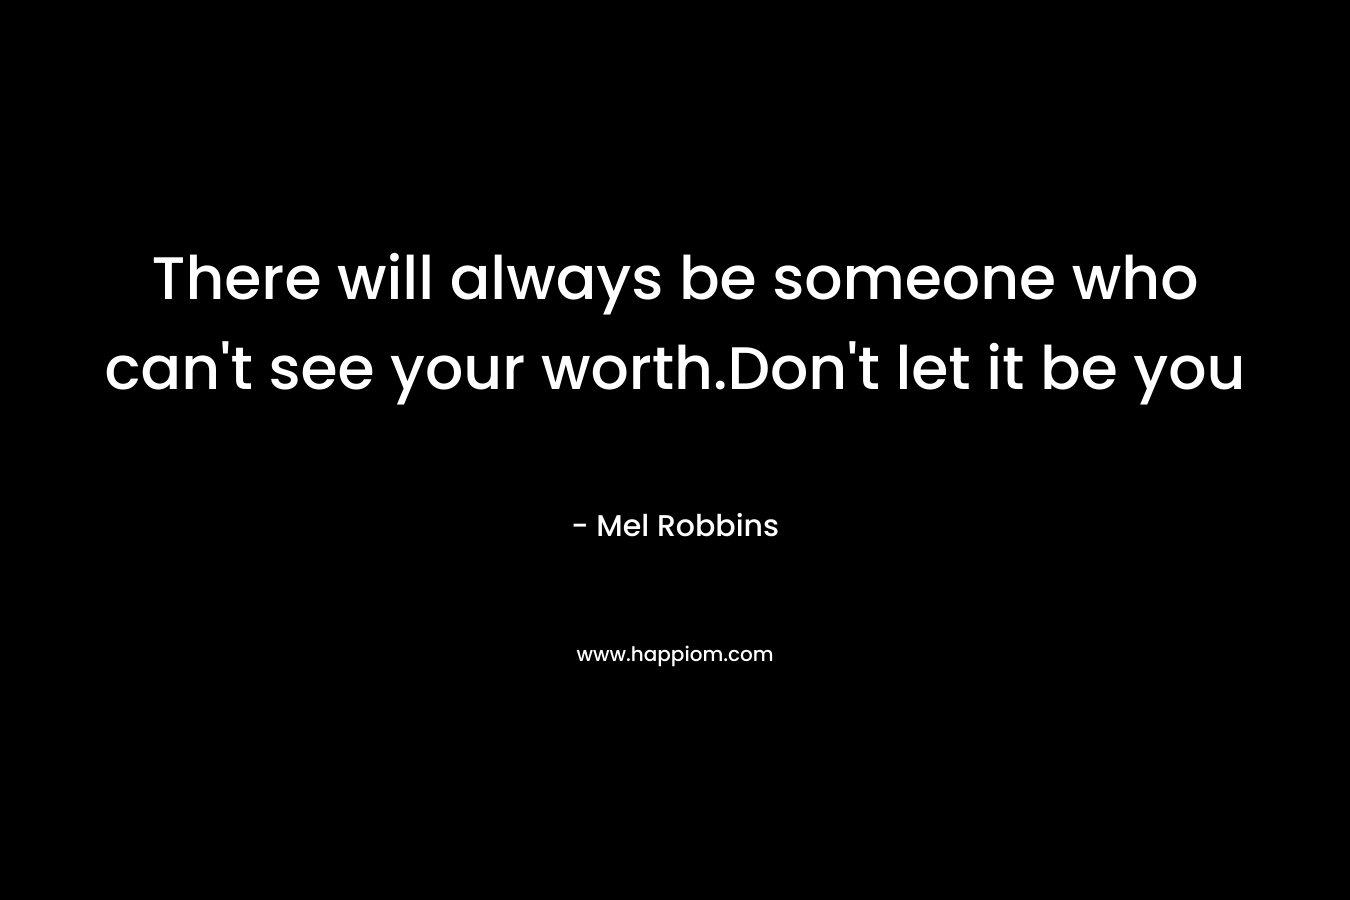 There will always be someone who can't see your worth.Don't let it be you